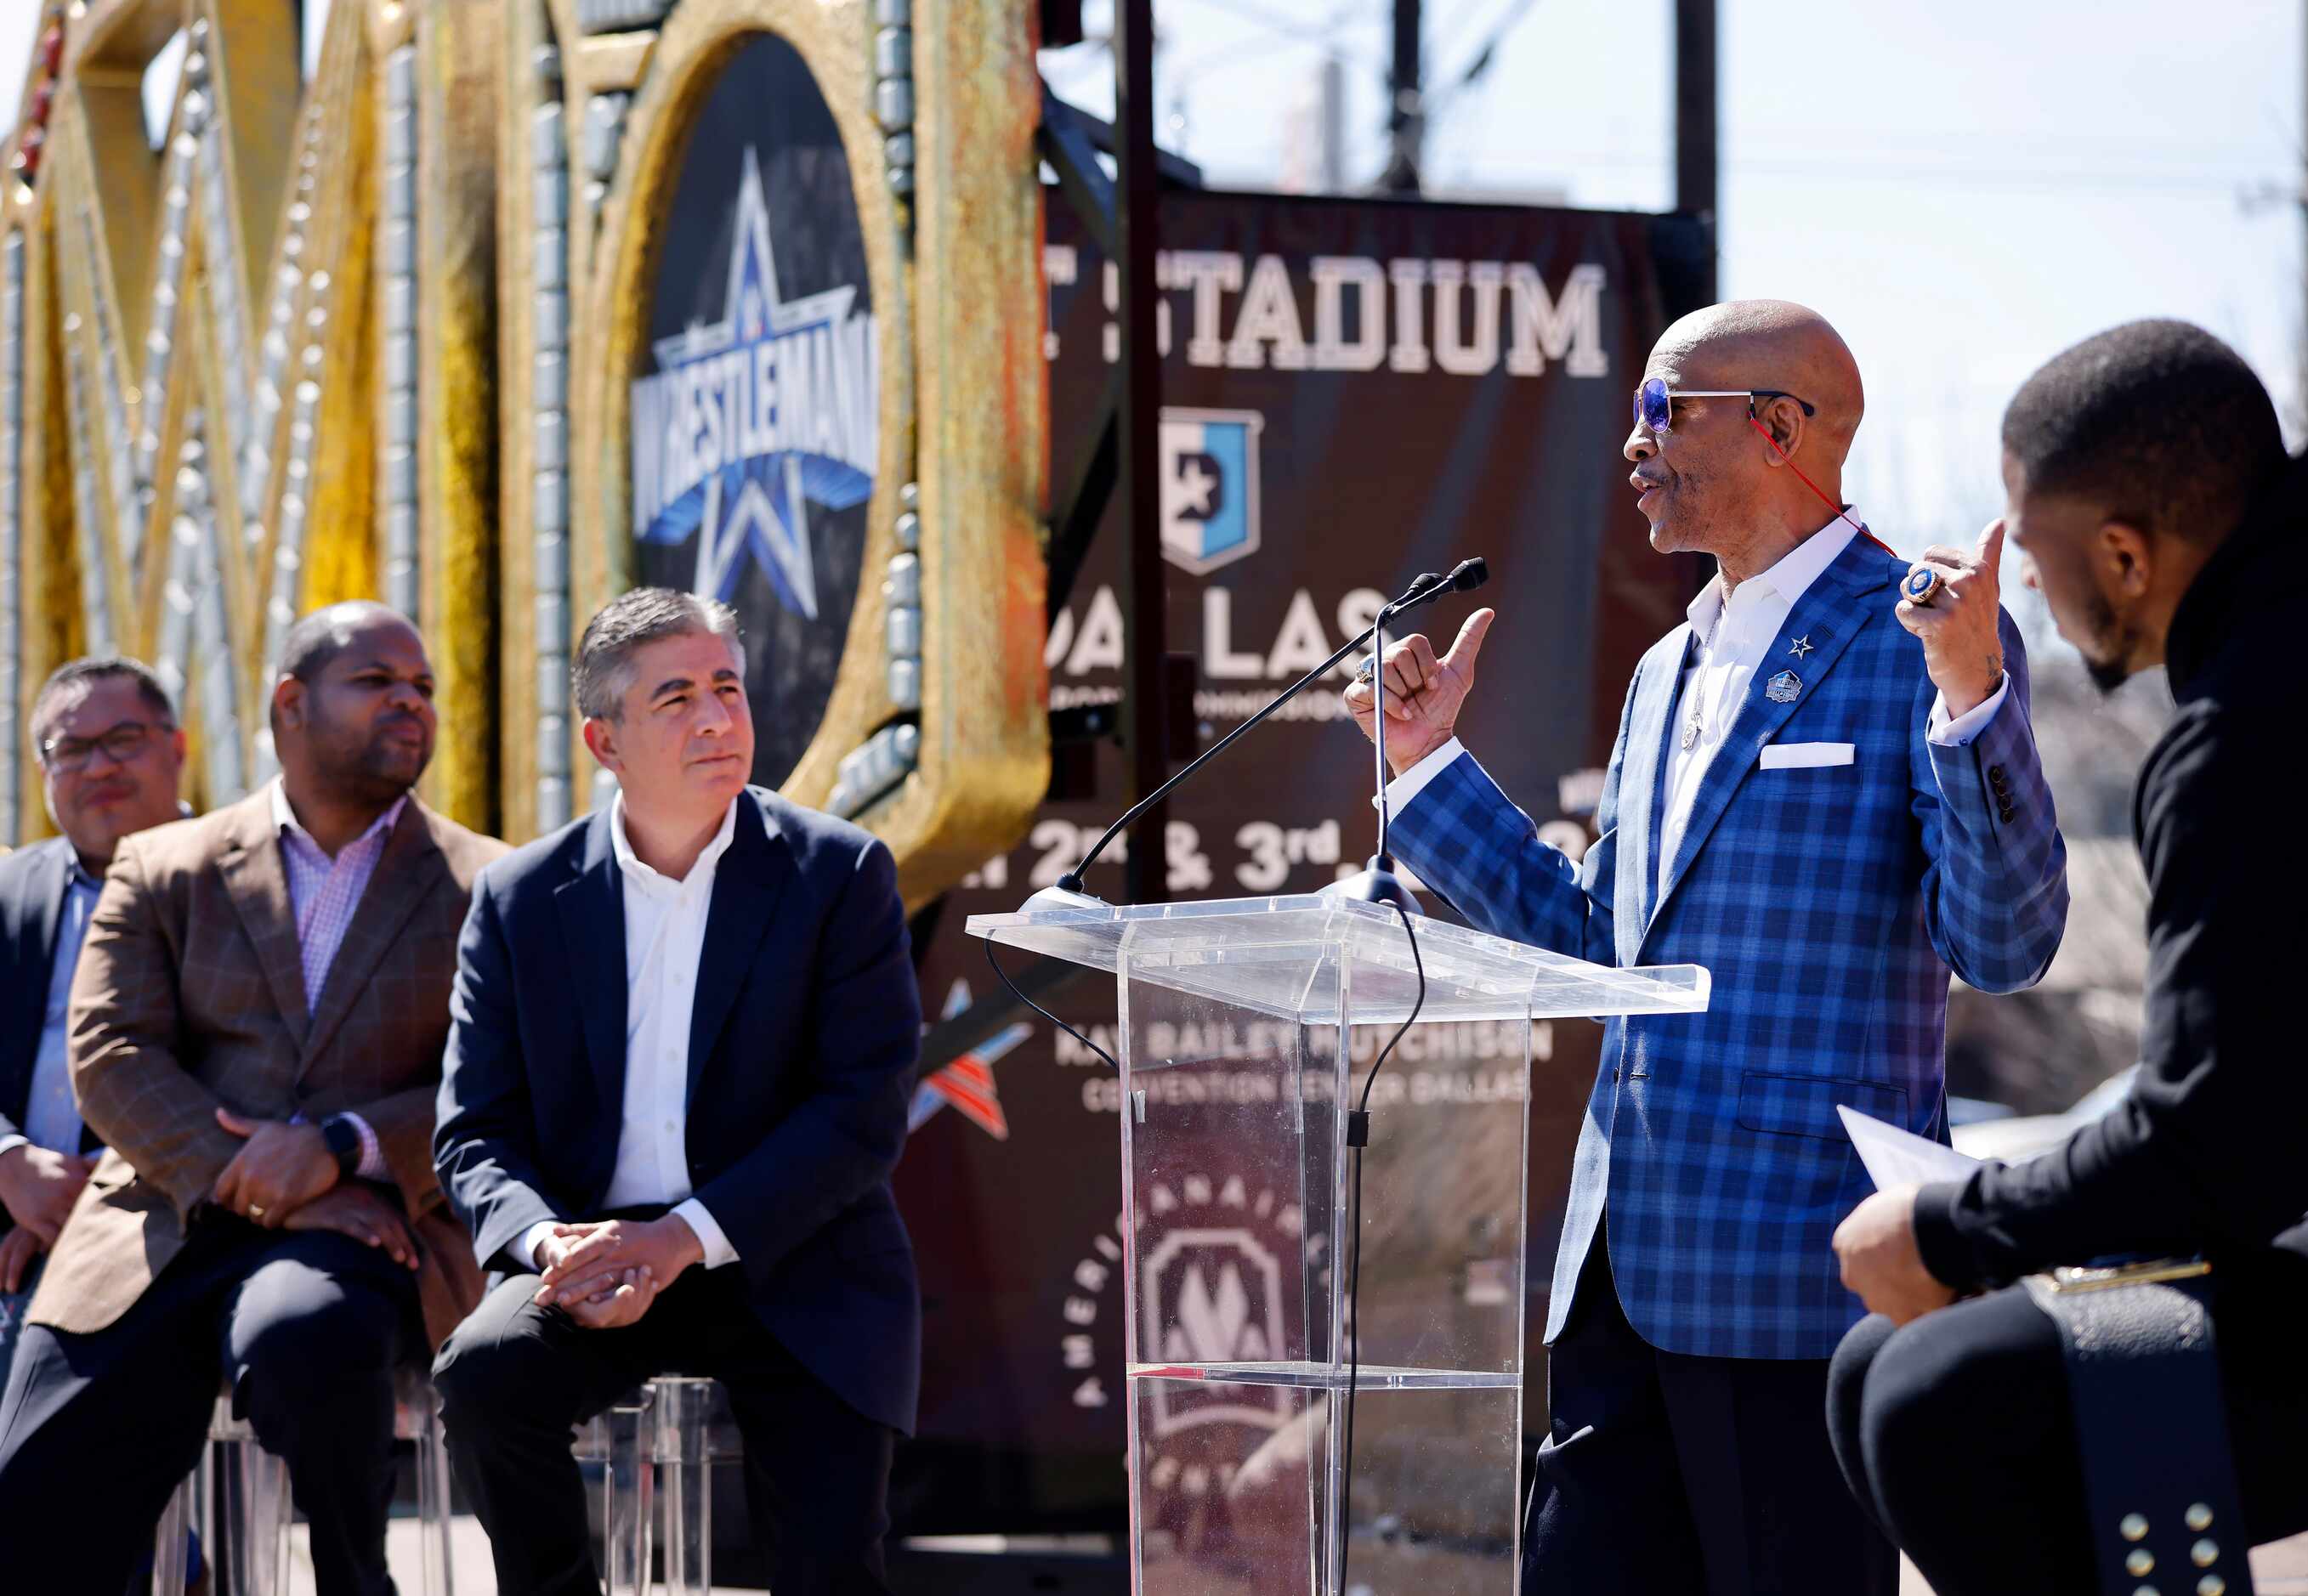 Dallas Cowboys Hall of Famer Drew Pearson spoke passionately about wrestling before a...